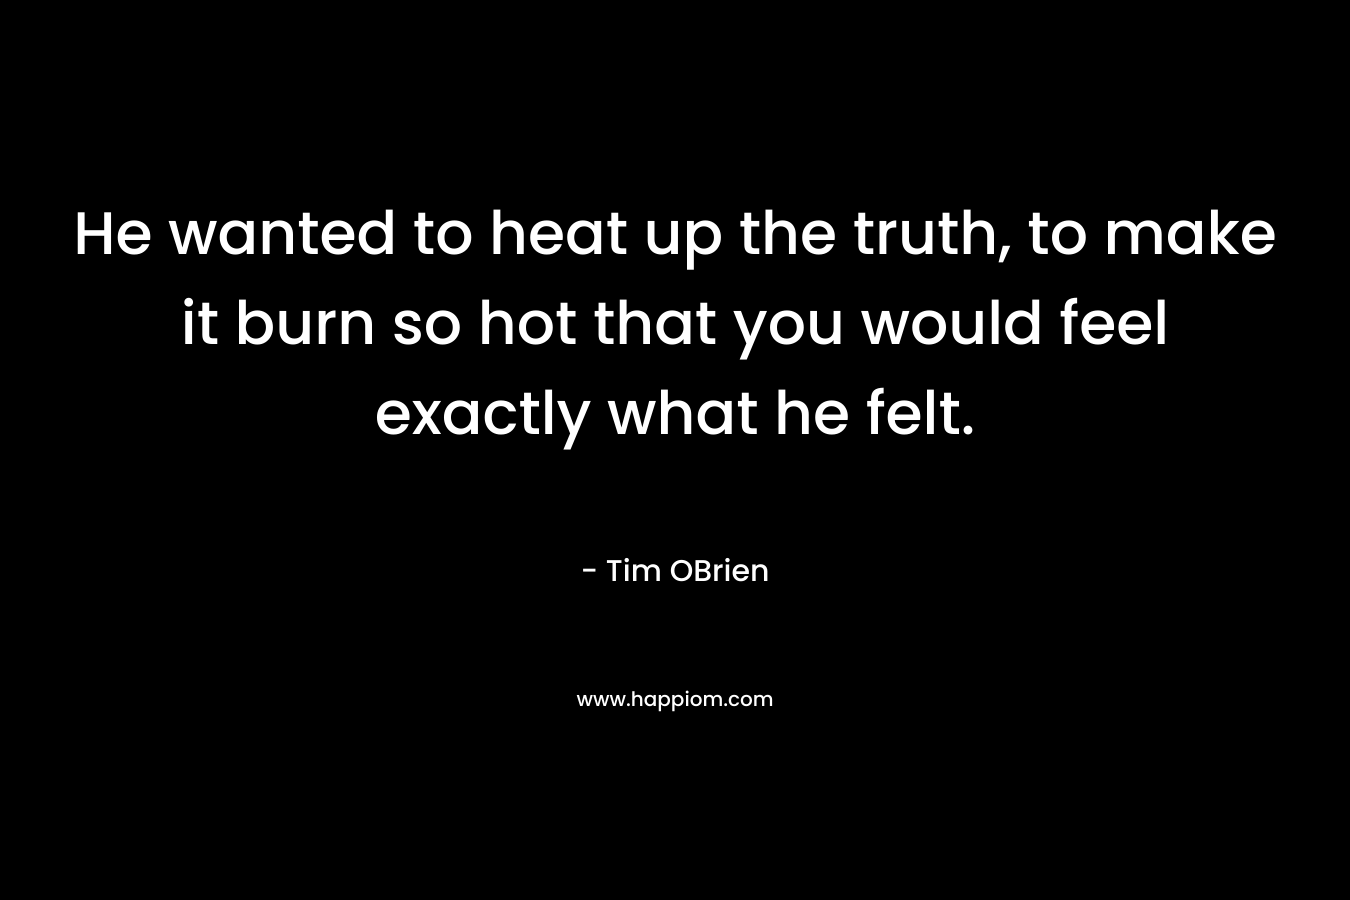 He wanted to heat up the truth, to make it burn so hot that you would feel exactly what he felt.